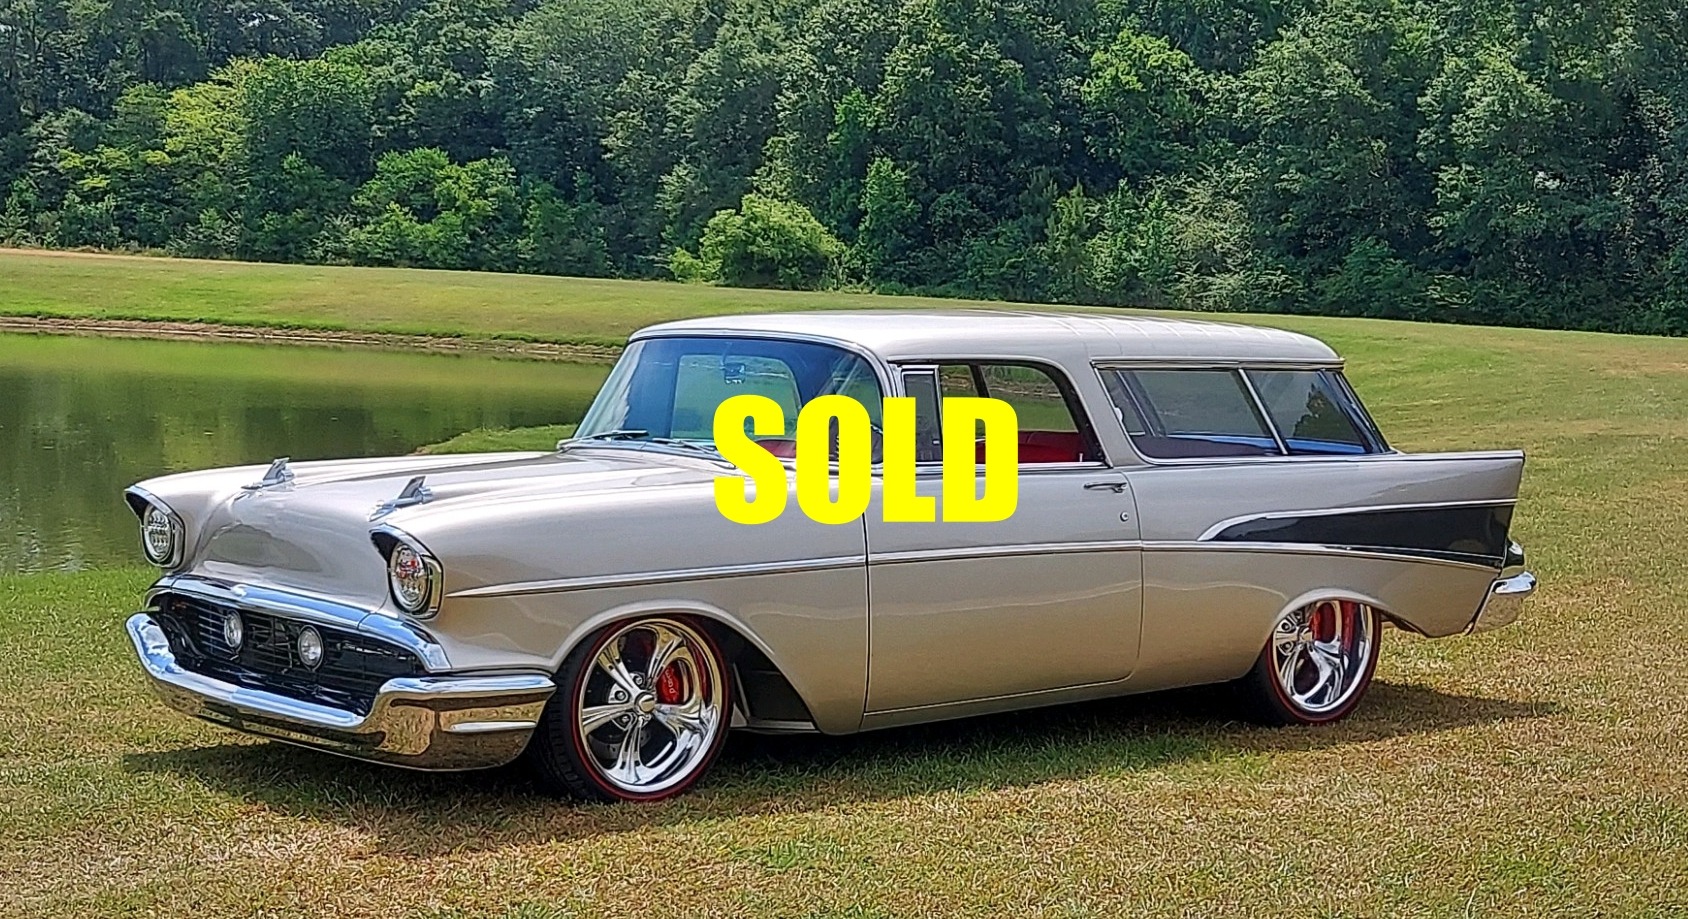 Used 1957 Chevrolet Nomad  209 , For Sale $245000, Call Us: (704) 996-3735